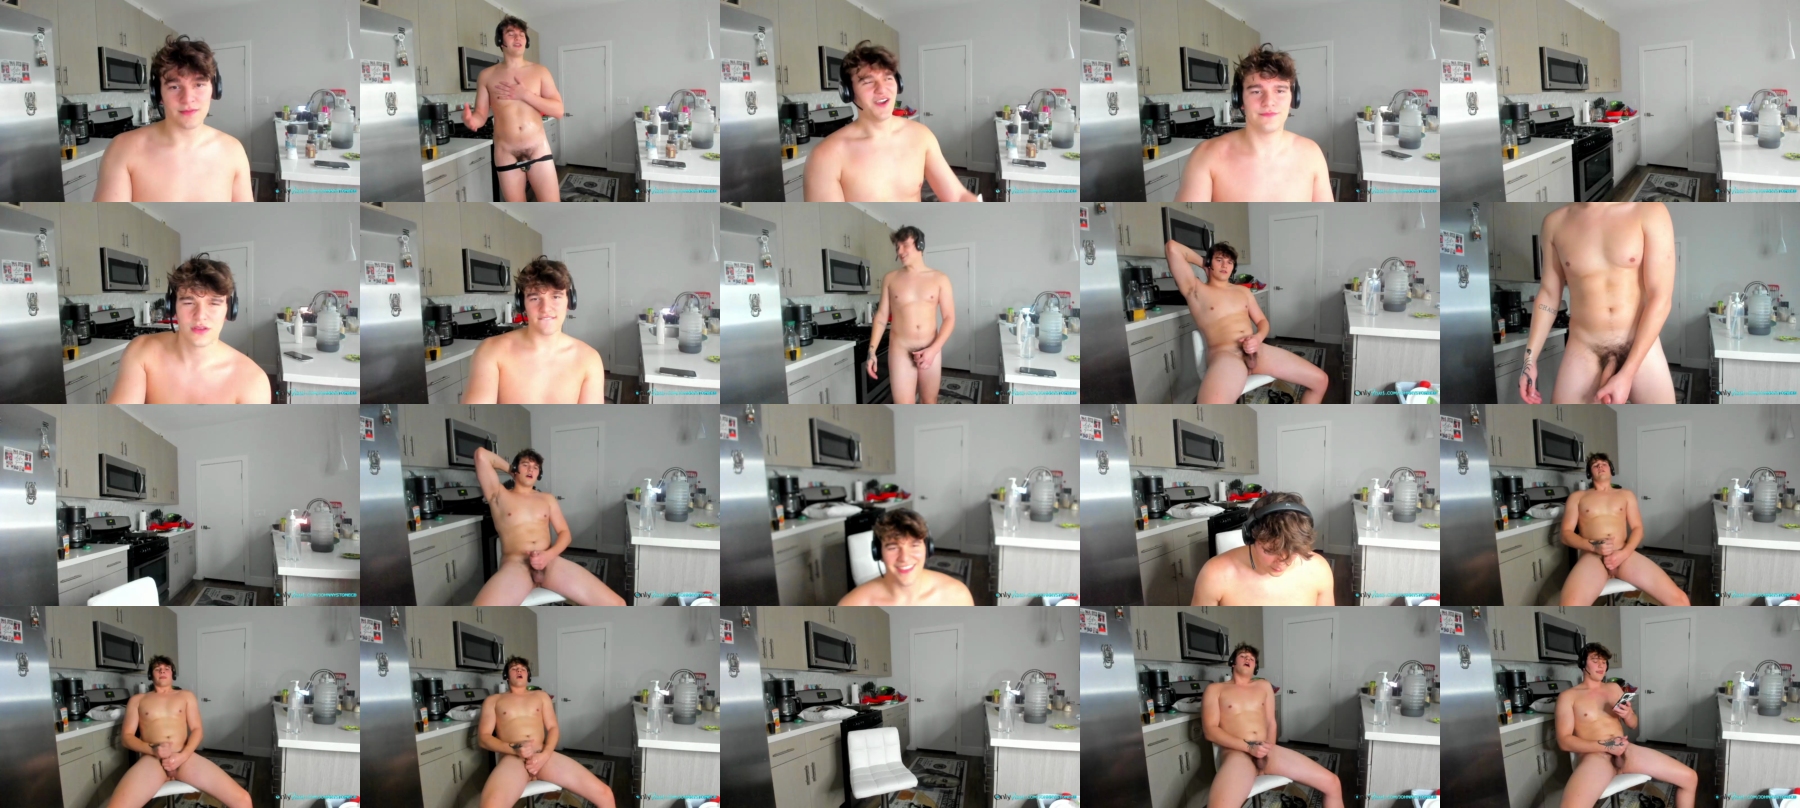 Thejohnnystone  23-07-2021 Male Nude